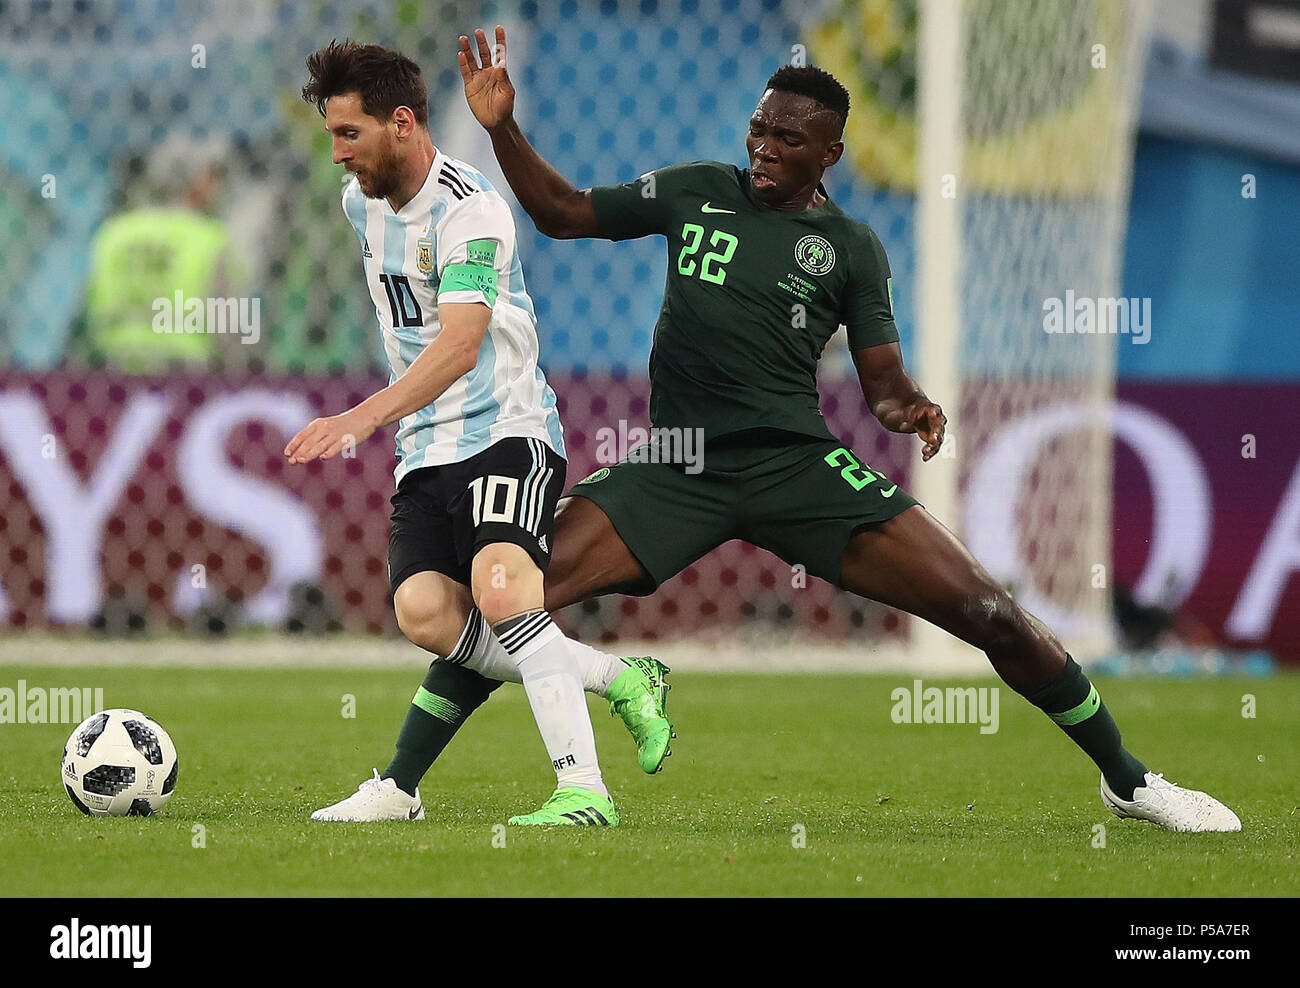 Saint Petersburg, Russia. 26th June, 2018. Lionel Messi (L) of Argentina vies with Kenneth Omeruo of Nigeria during the 2018 FIFA World Cup Group D match between Nigeria and Argentina in Saint Petersburg, Russia, June 26, 2018. Credit: Wu Zhuang/Xinhua/Alamy Live News Stock Photo